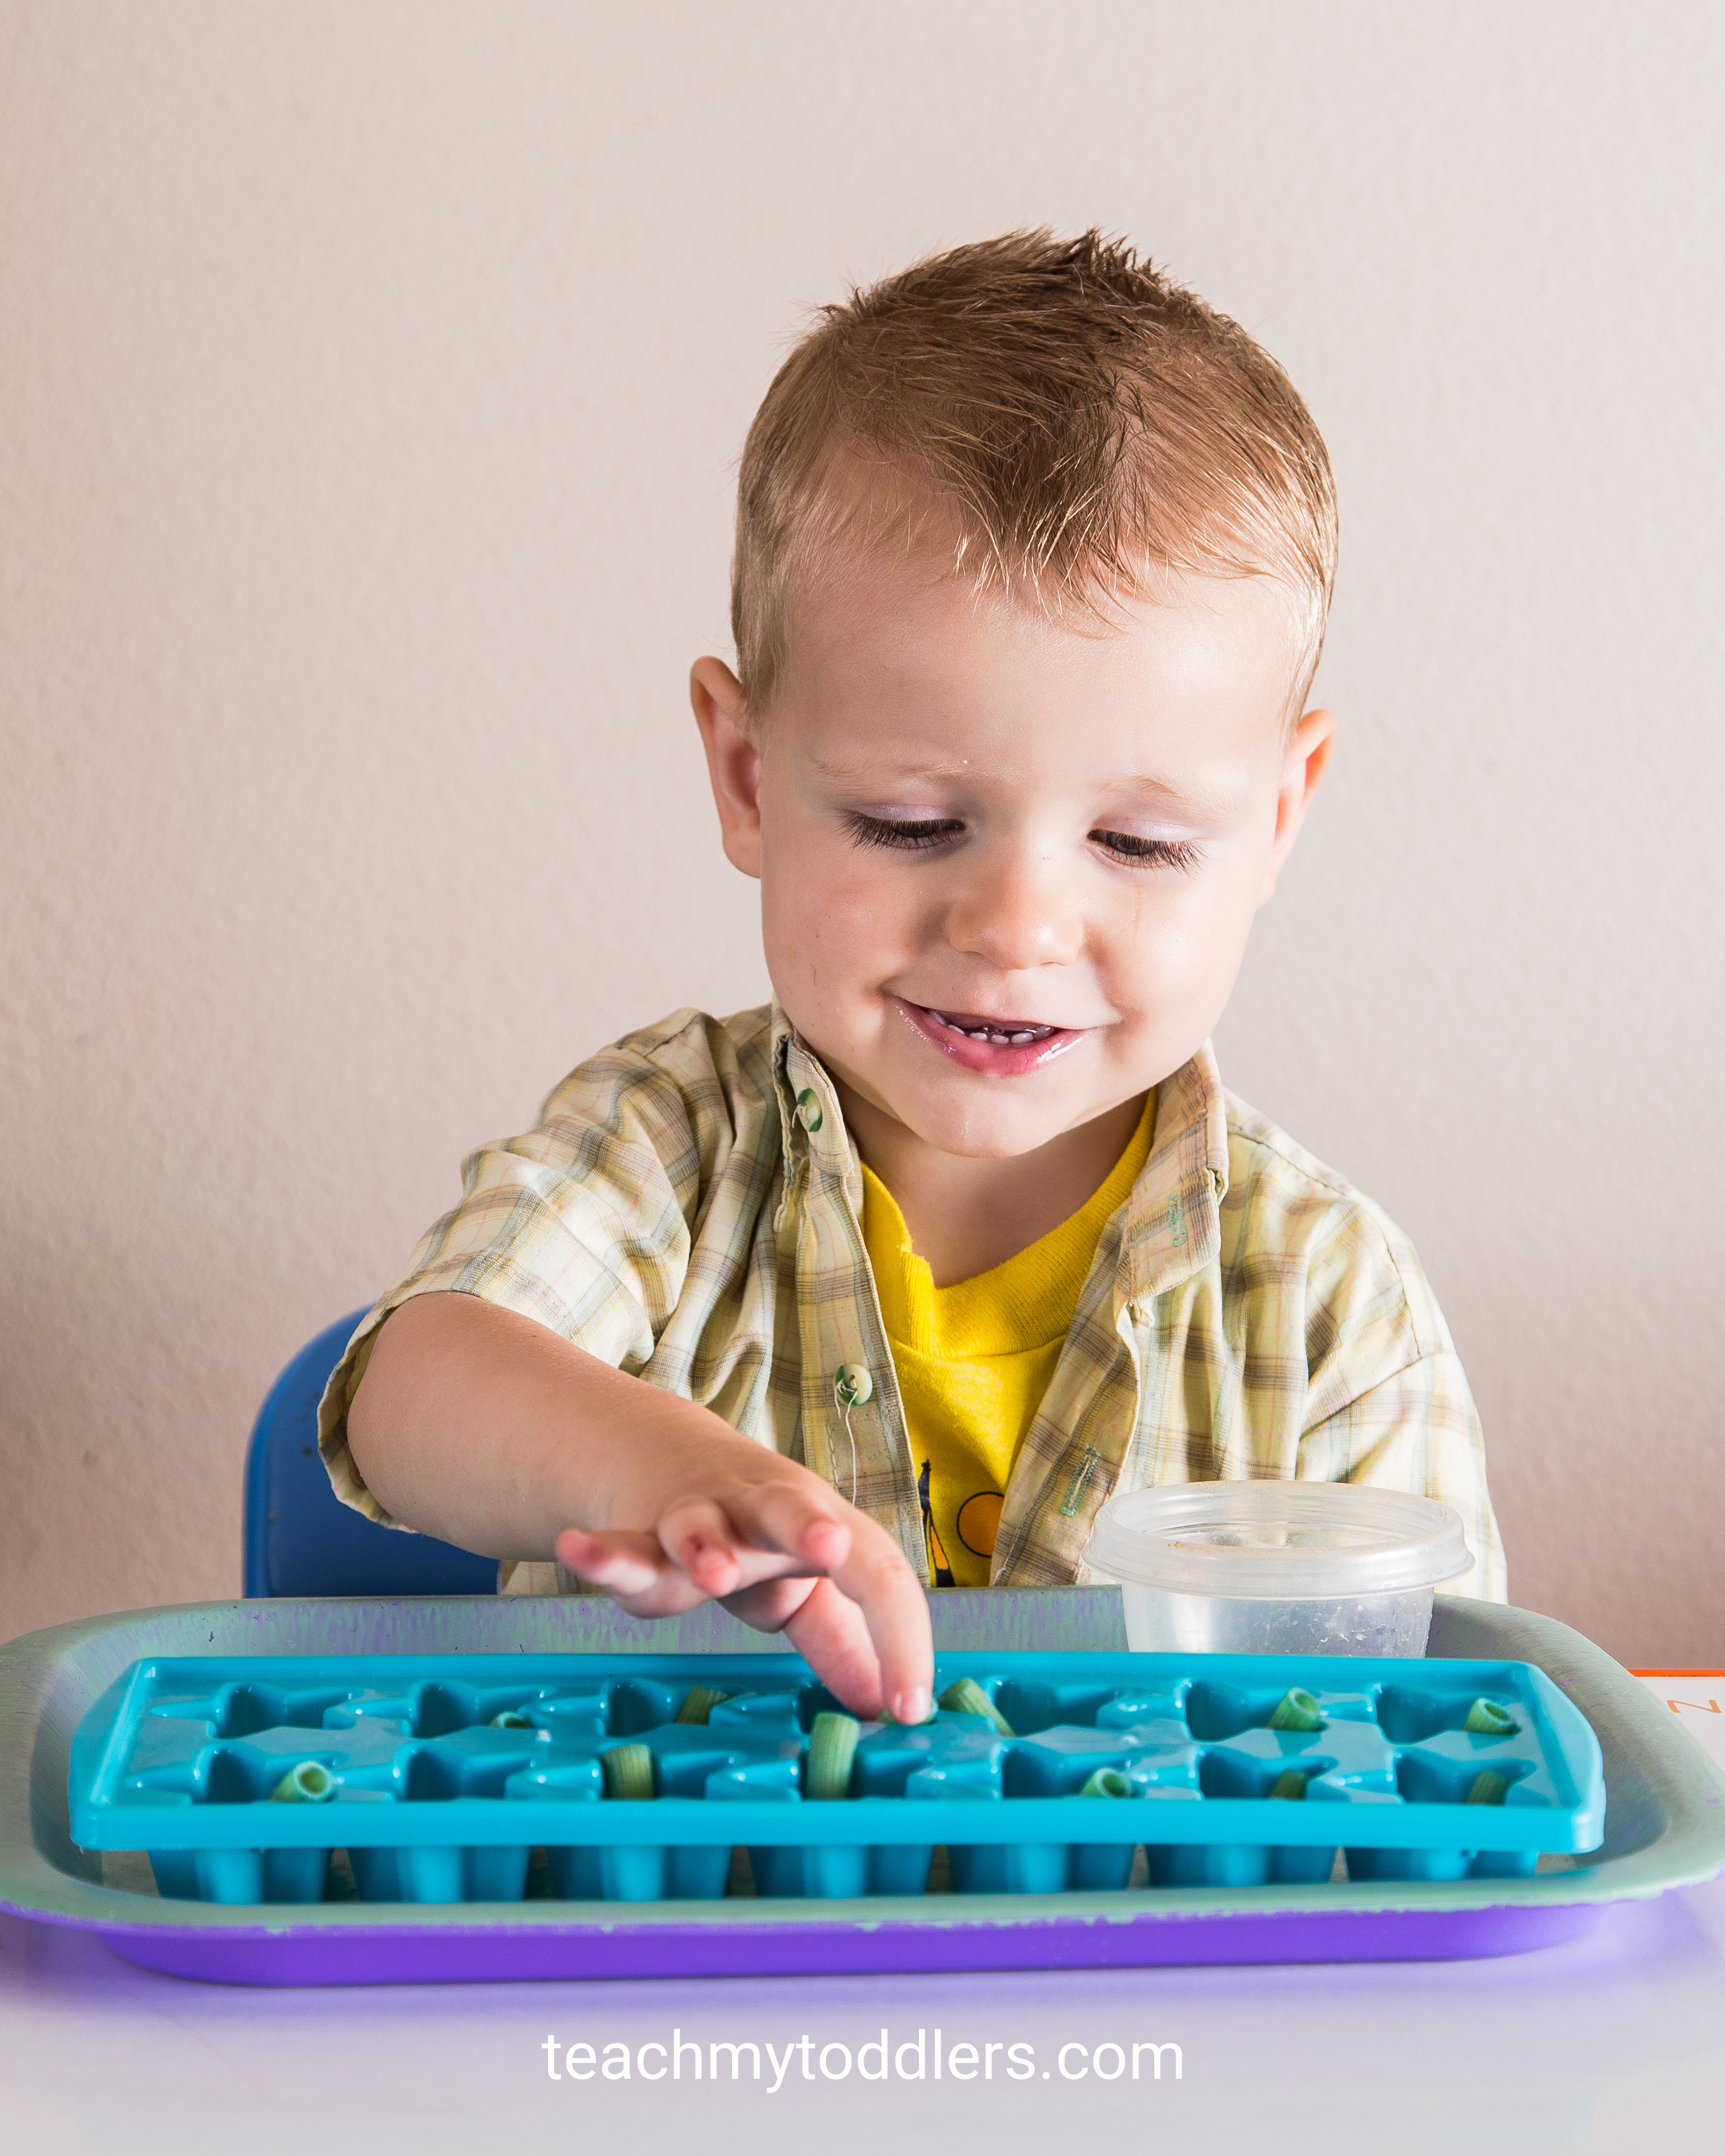 Find out how to teach your toddlers the color blue with these tot tray activities